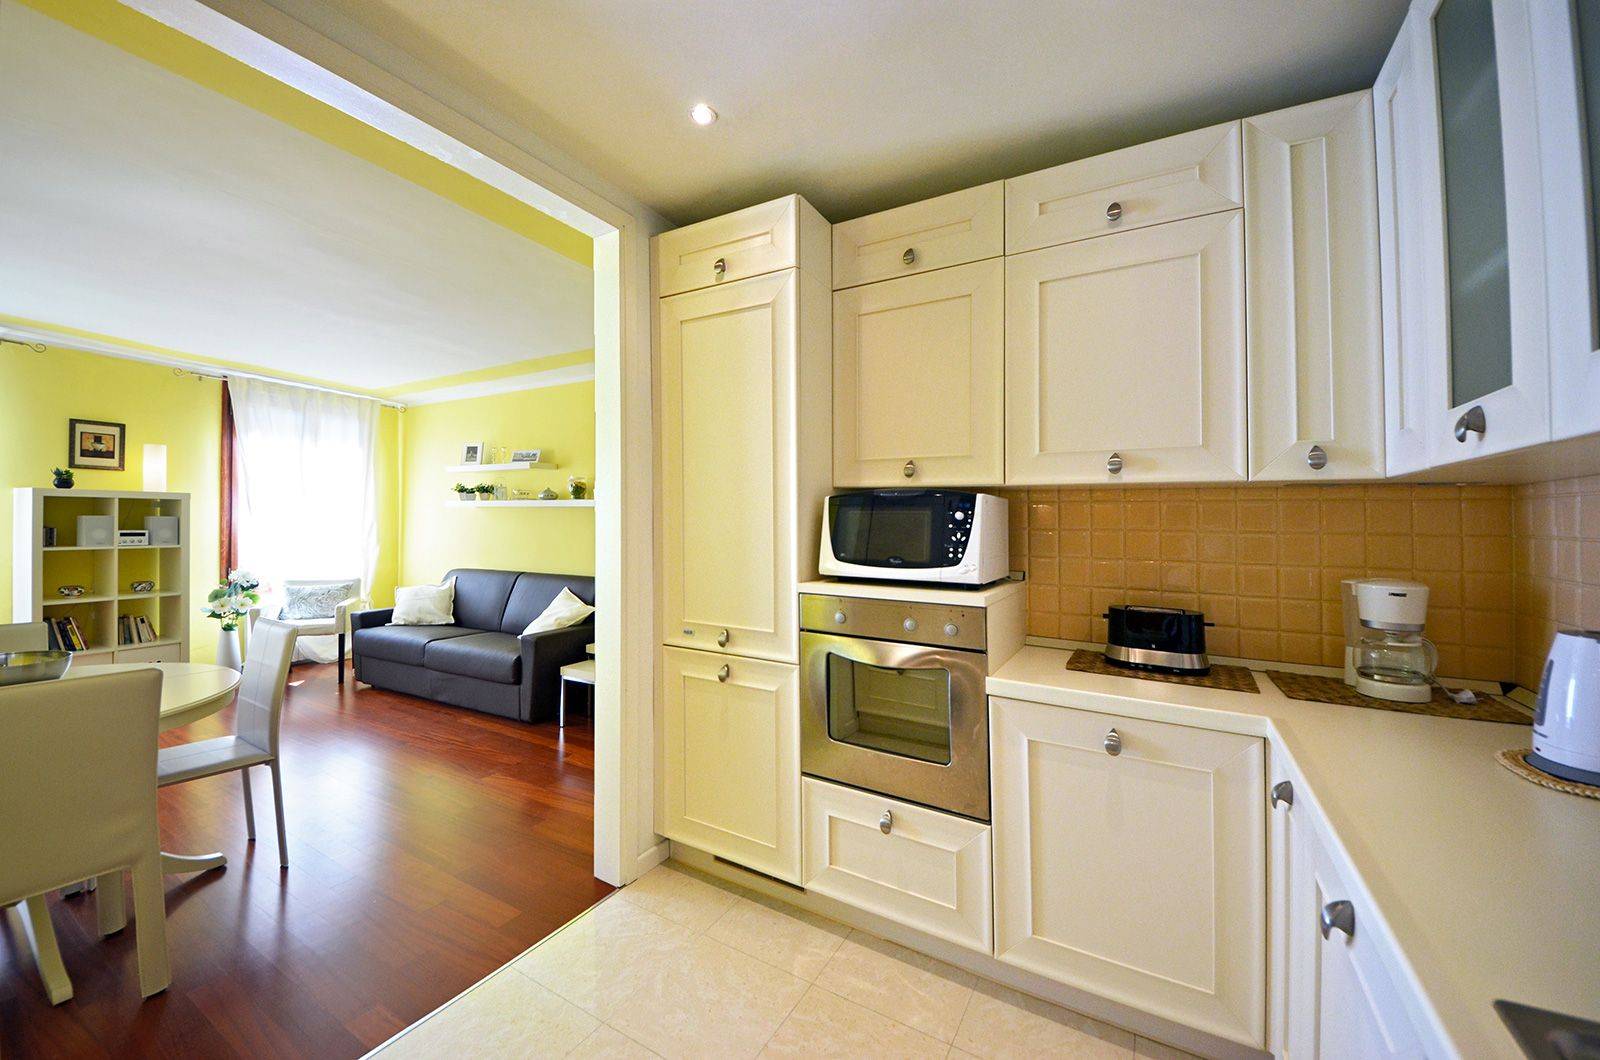 full optionals kitchen, spacious and well equipped